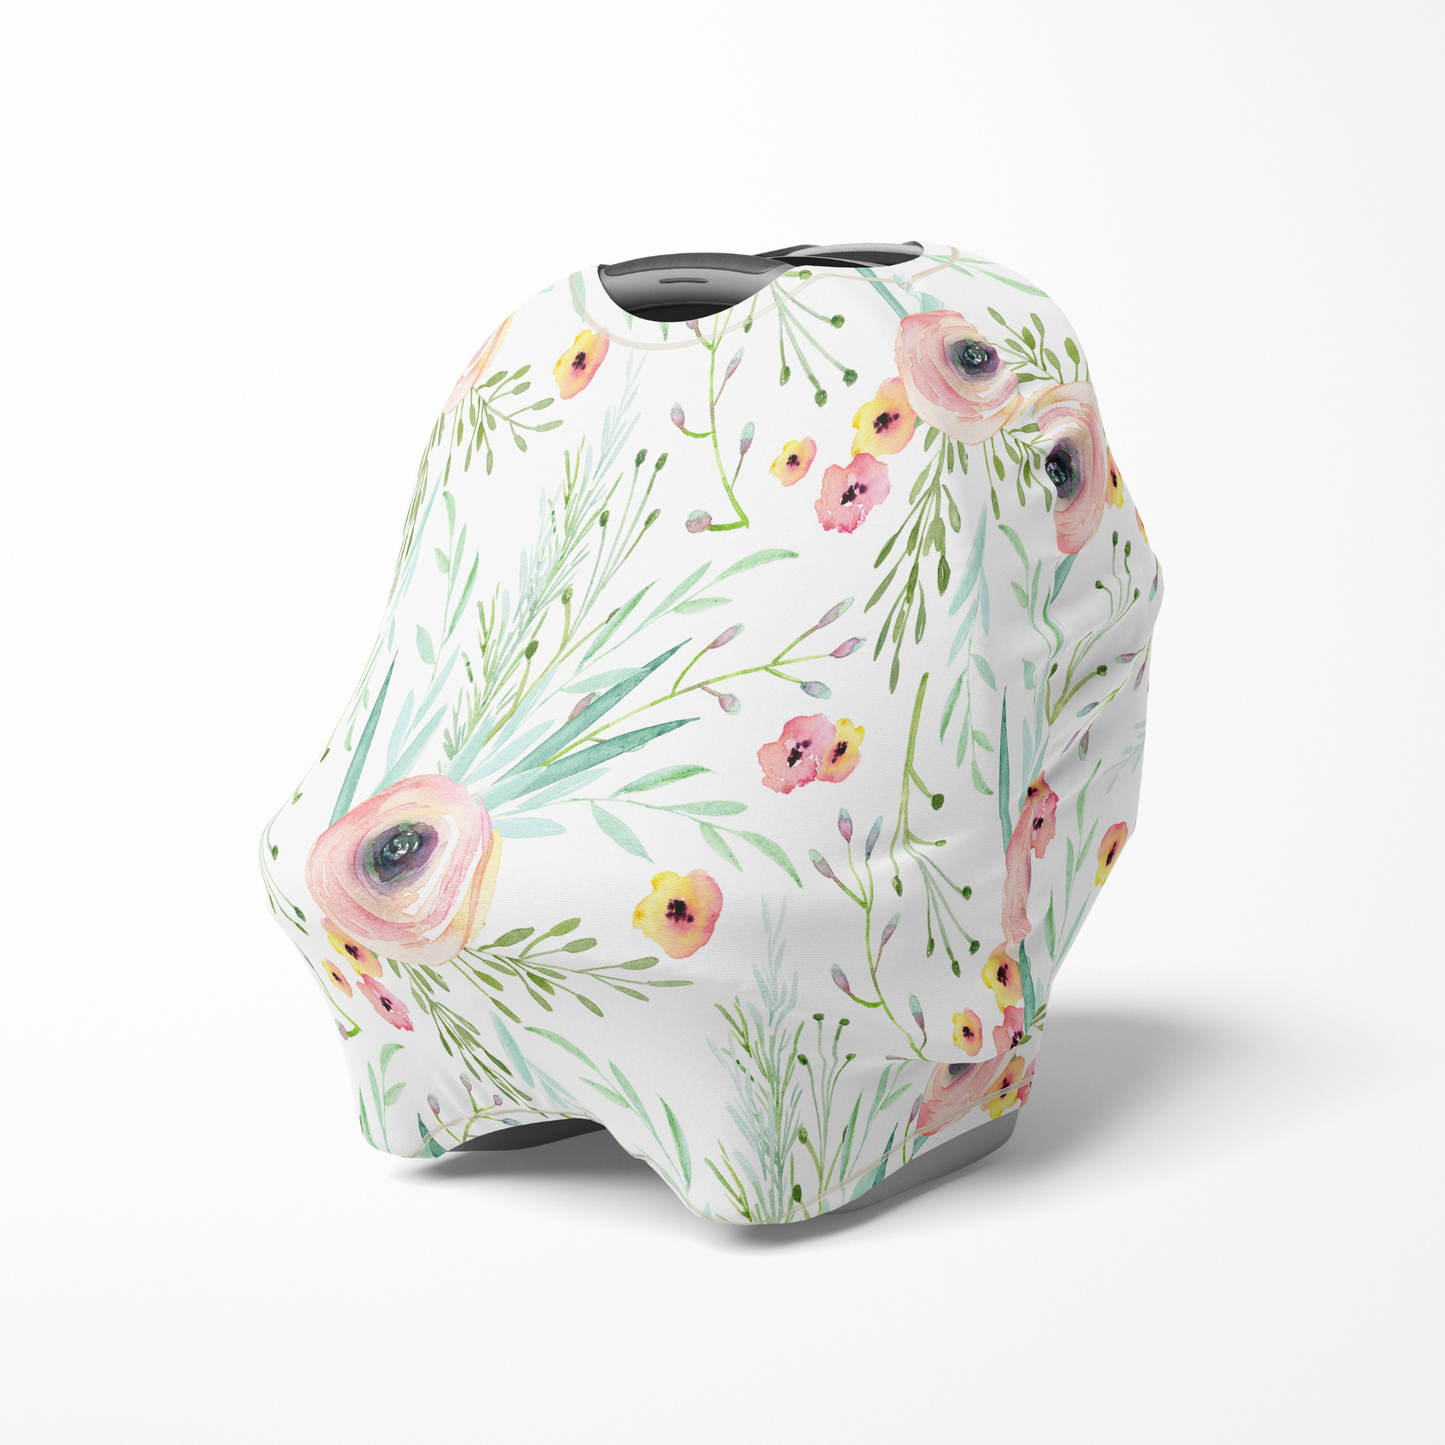 Dolly Lana Designs Multi use baby cover - Floral kiss